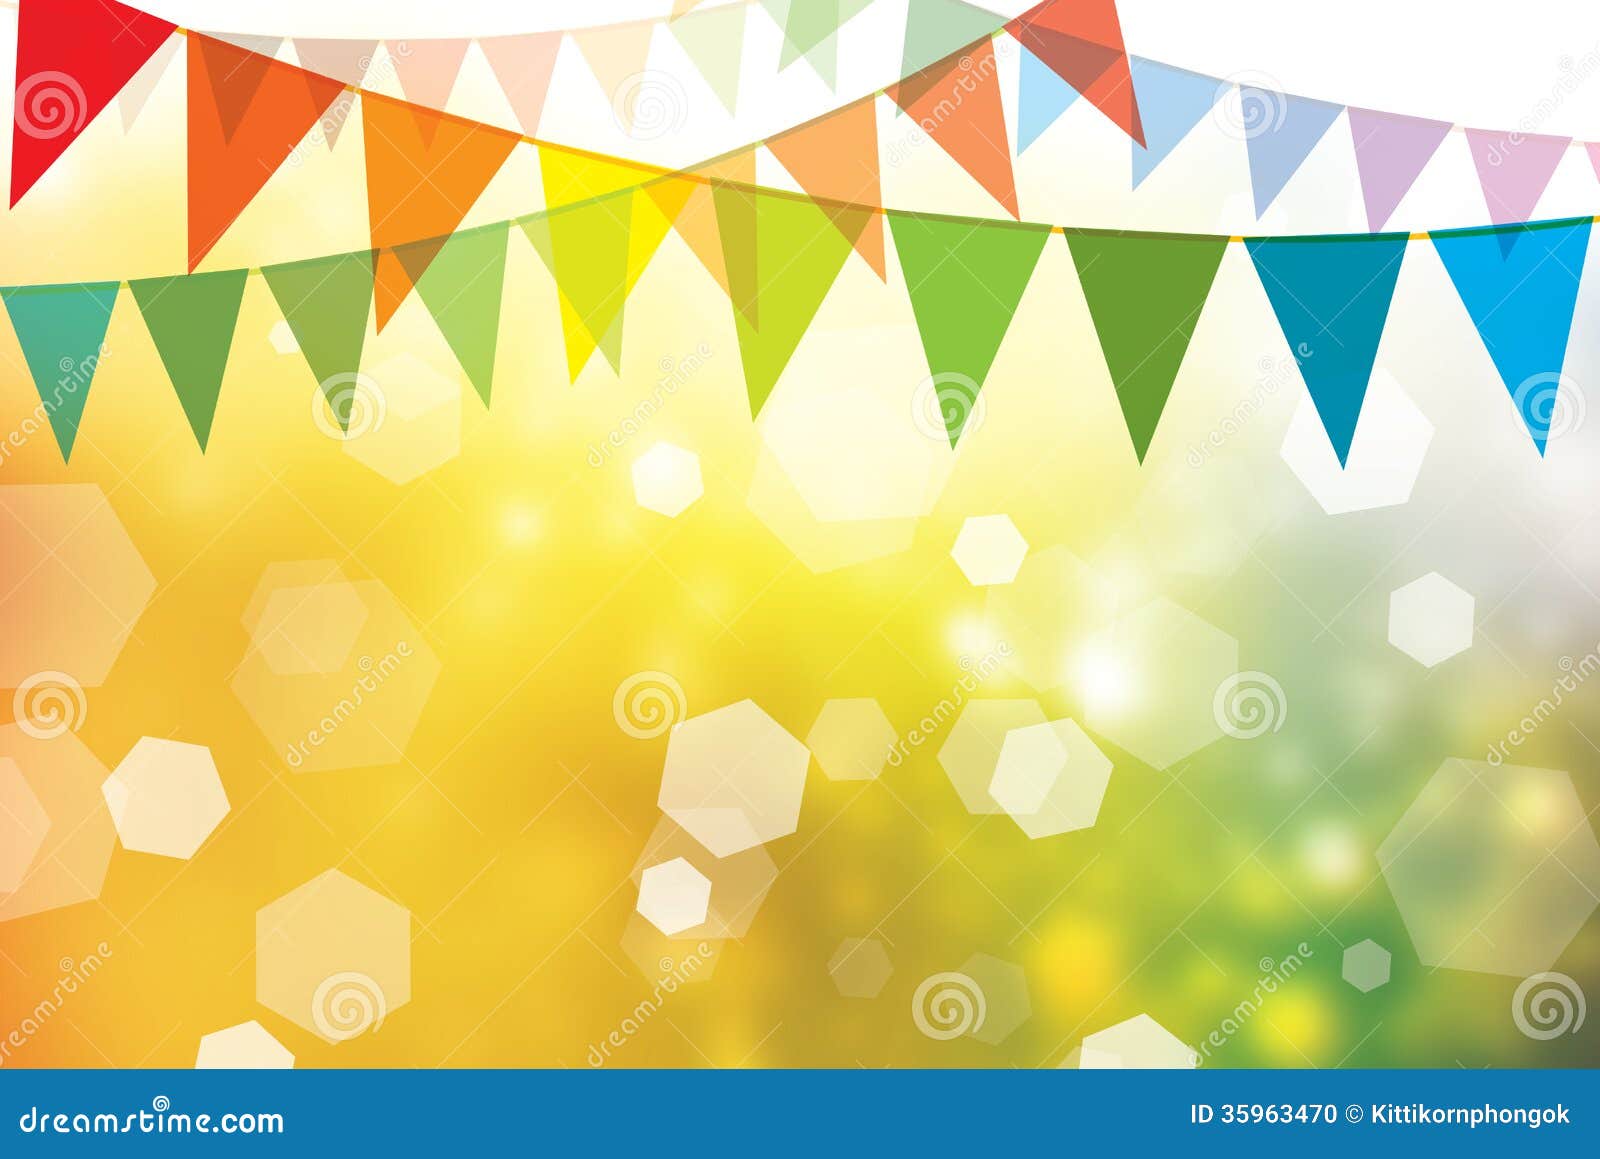 Festival Background Vector  FREE Vector Design  Cdr Ai EPS PNG SVG